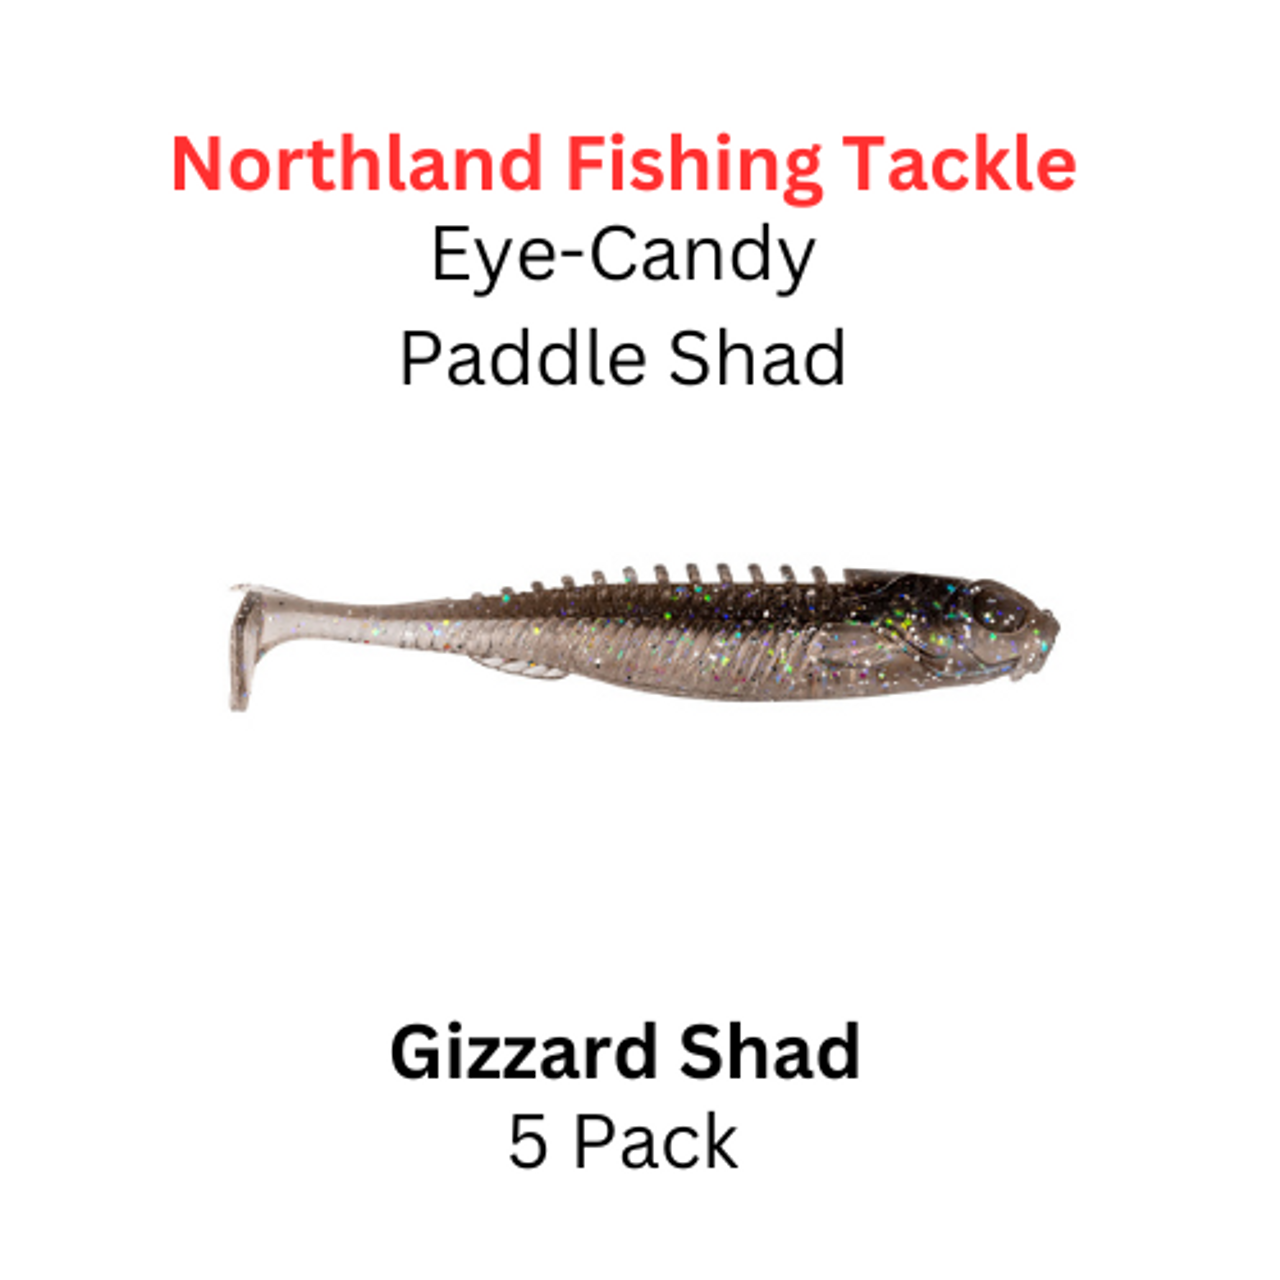 https://cdn11.bigcommerce.com/s-u9nbd/images/stencil/1280x1280/products/6666/16867/Northland_Fishing_Tackle_Eye_Candy_Paddle_Shad_Gizzard_Shad__84137.1688760563.png?c=2